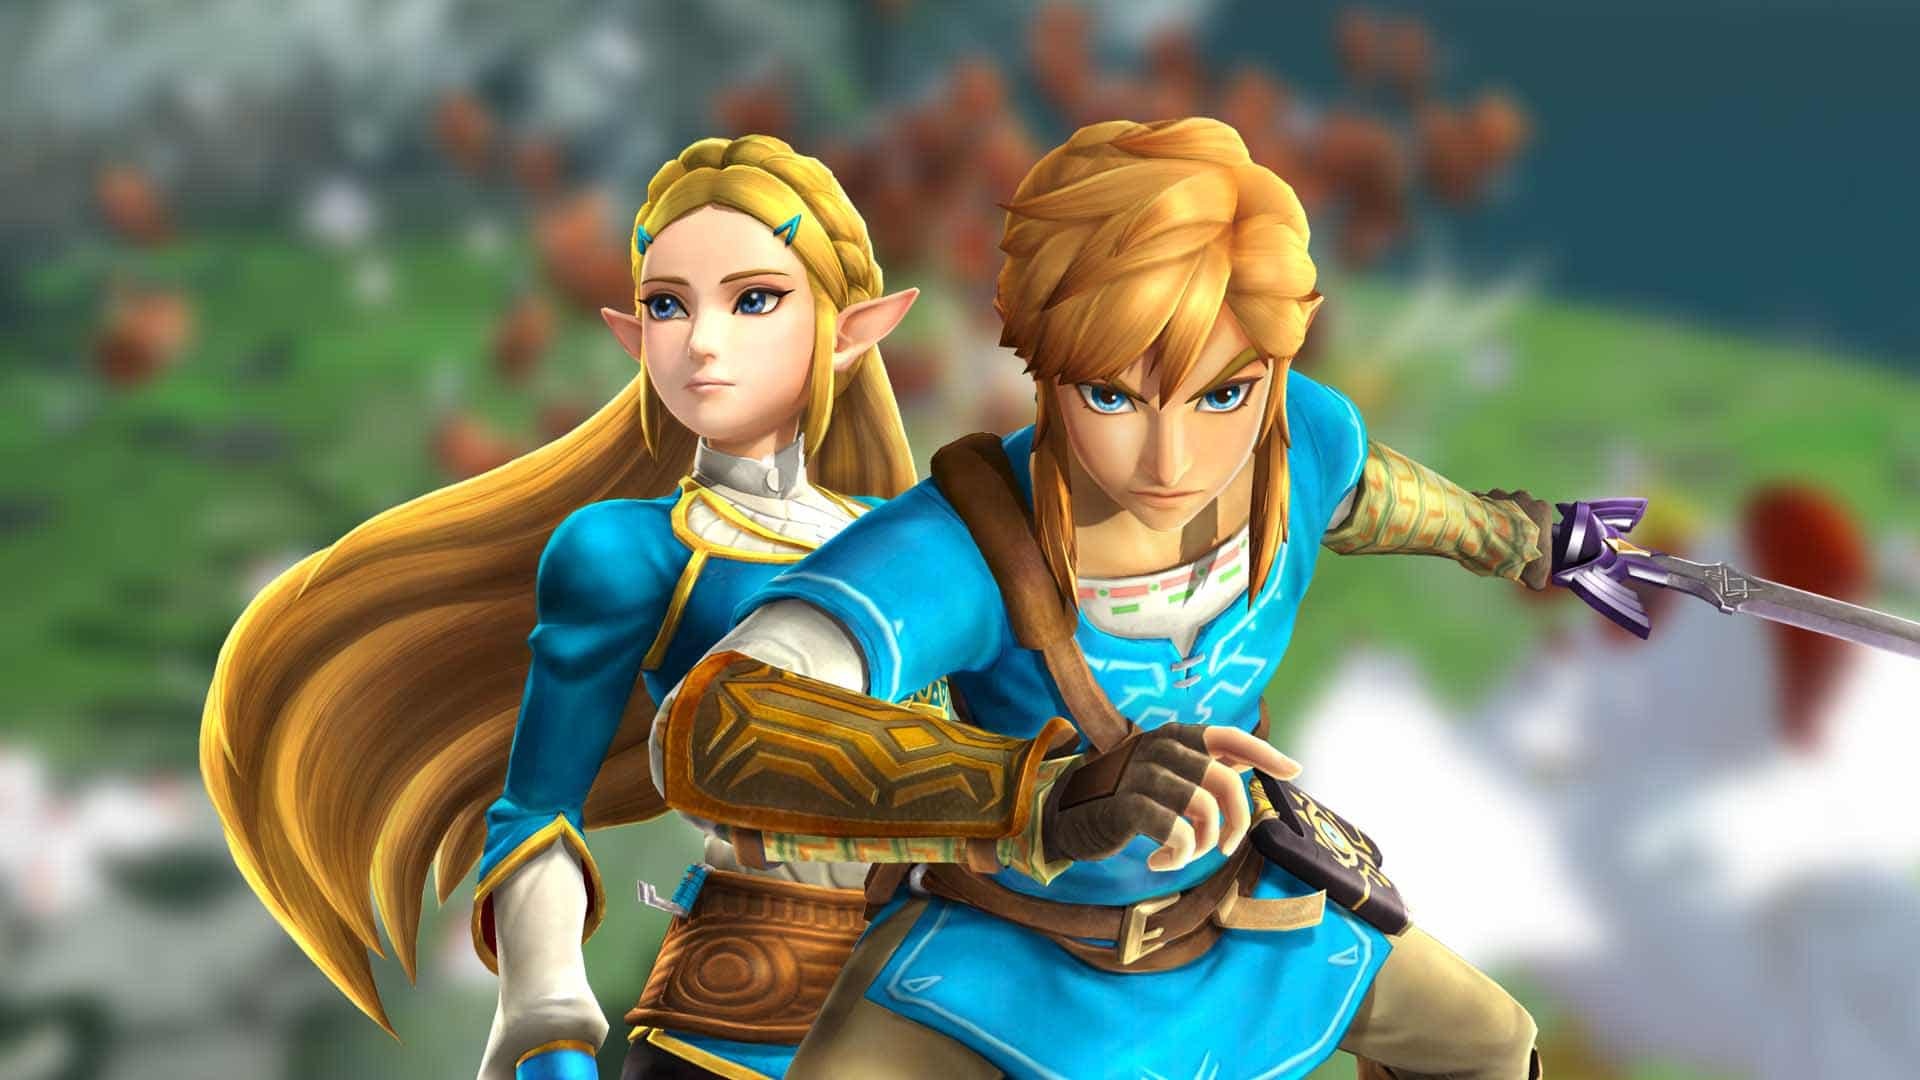 Hyrule Warriors, Age of Calamity, Nintendo Switch, Prequel to Breath of the Wild, 1920x1080 Full HD Desktop